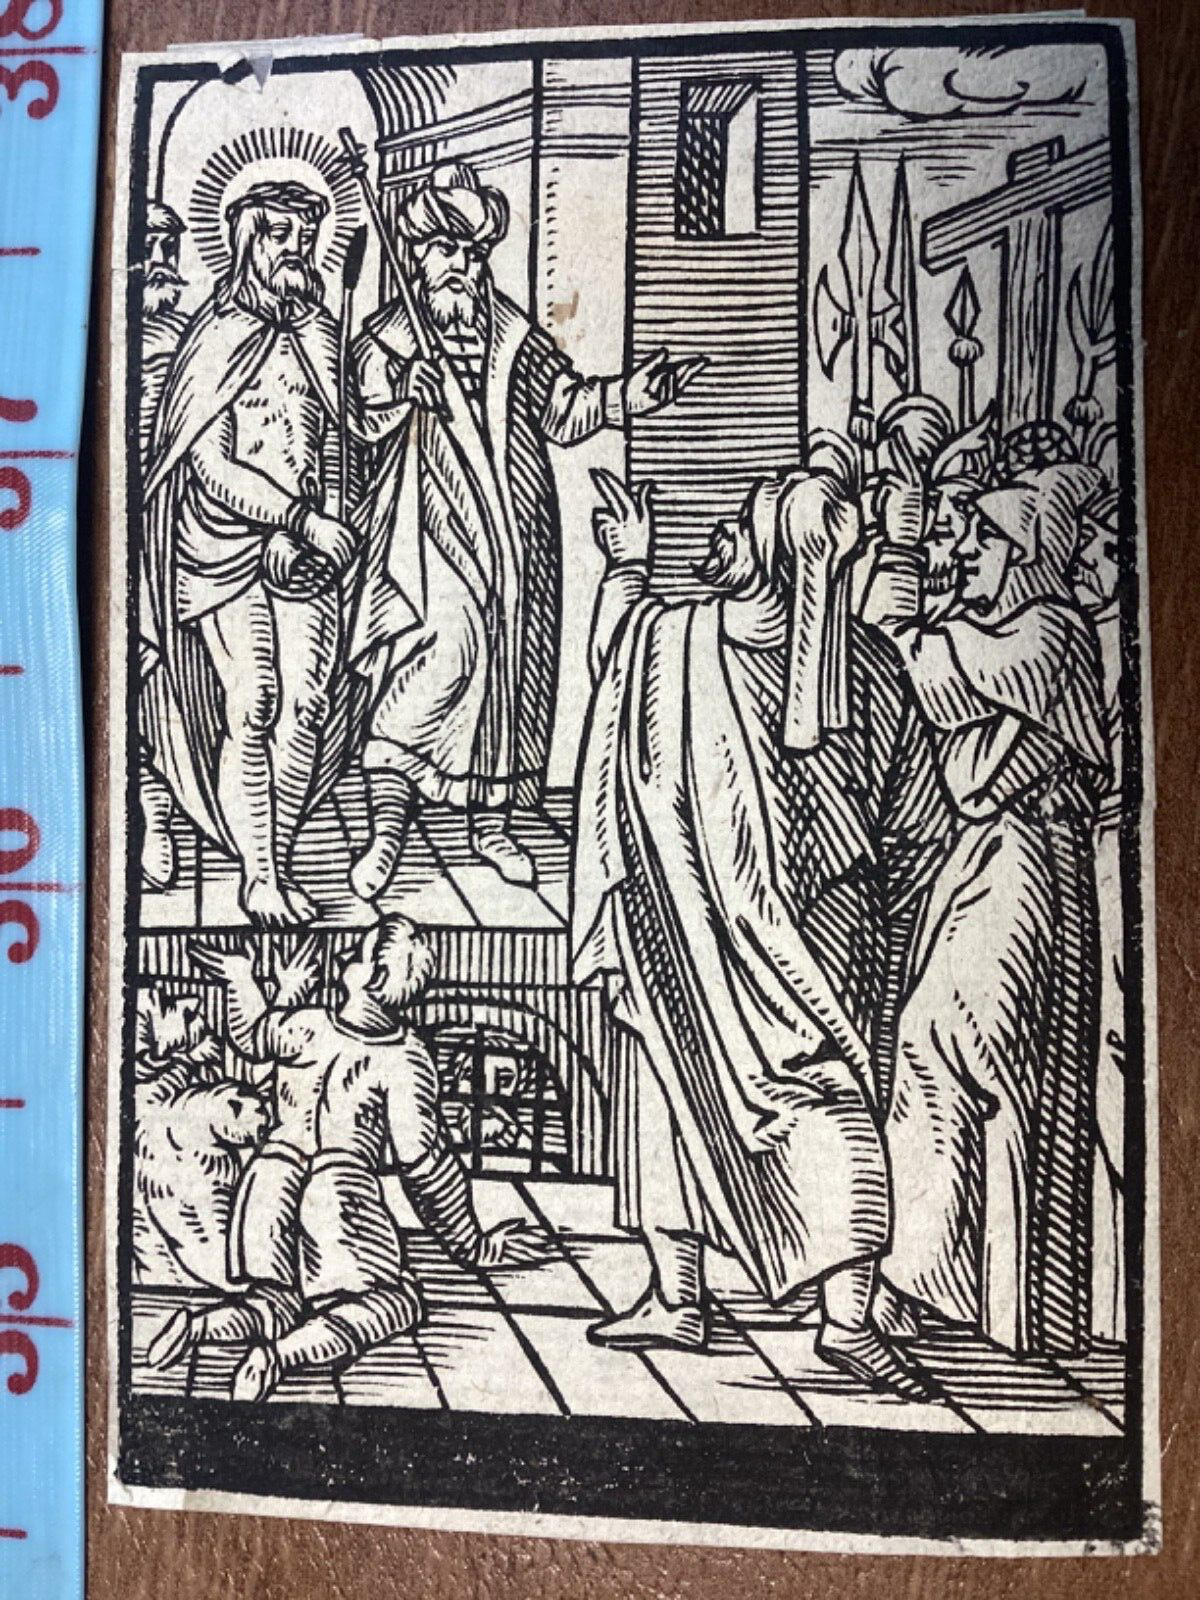 Antique Engraving Religious Print Woodcut 1500’s? Truth accused as a heretic